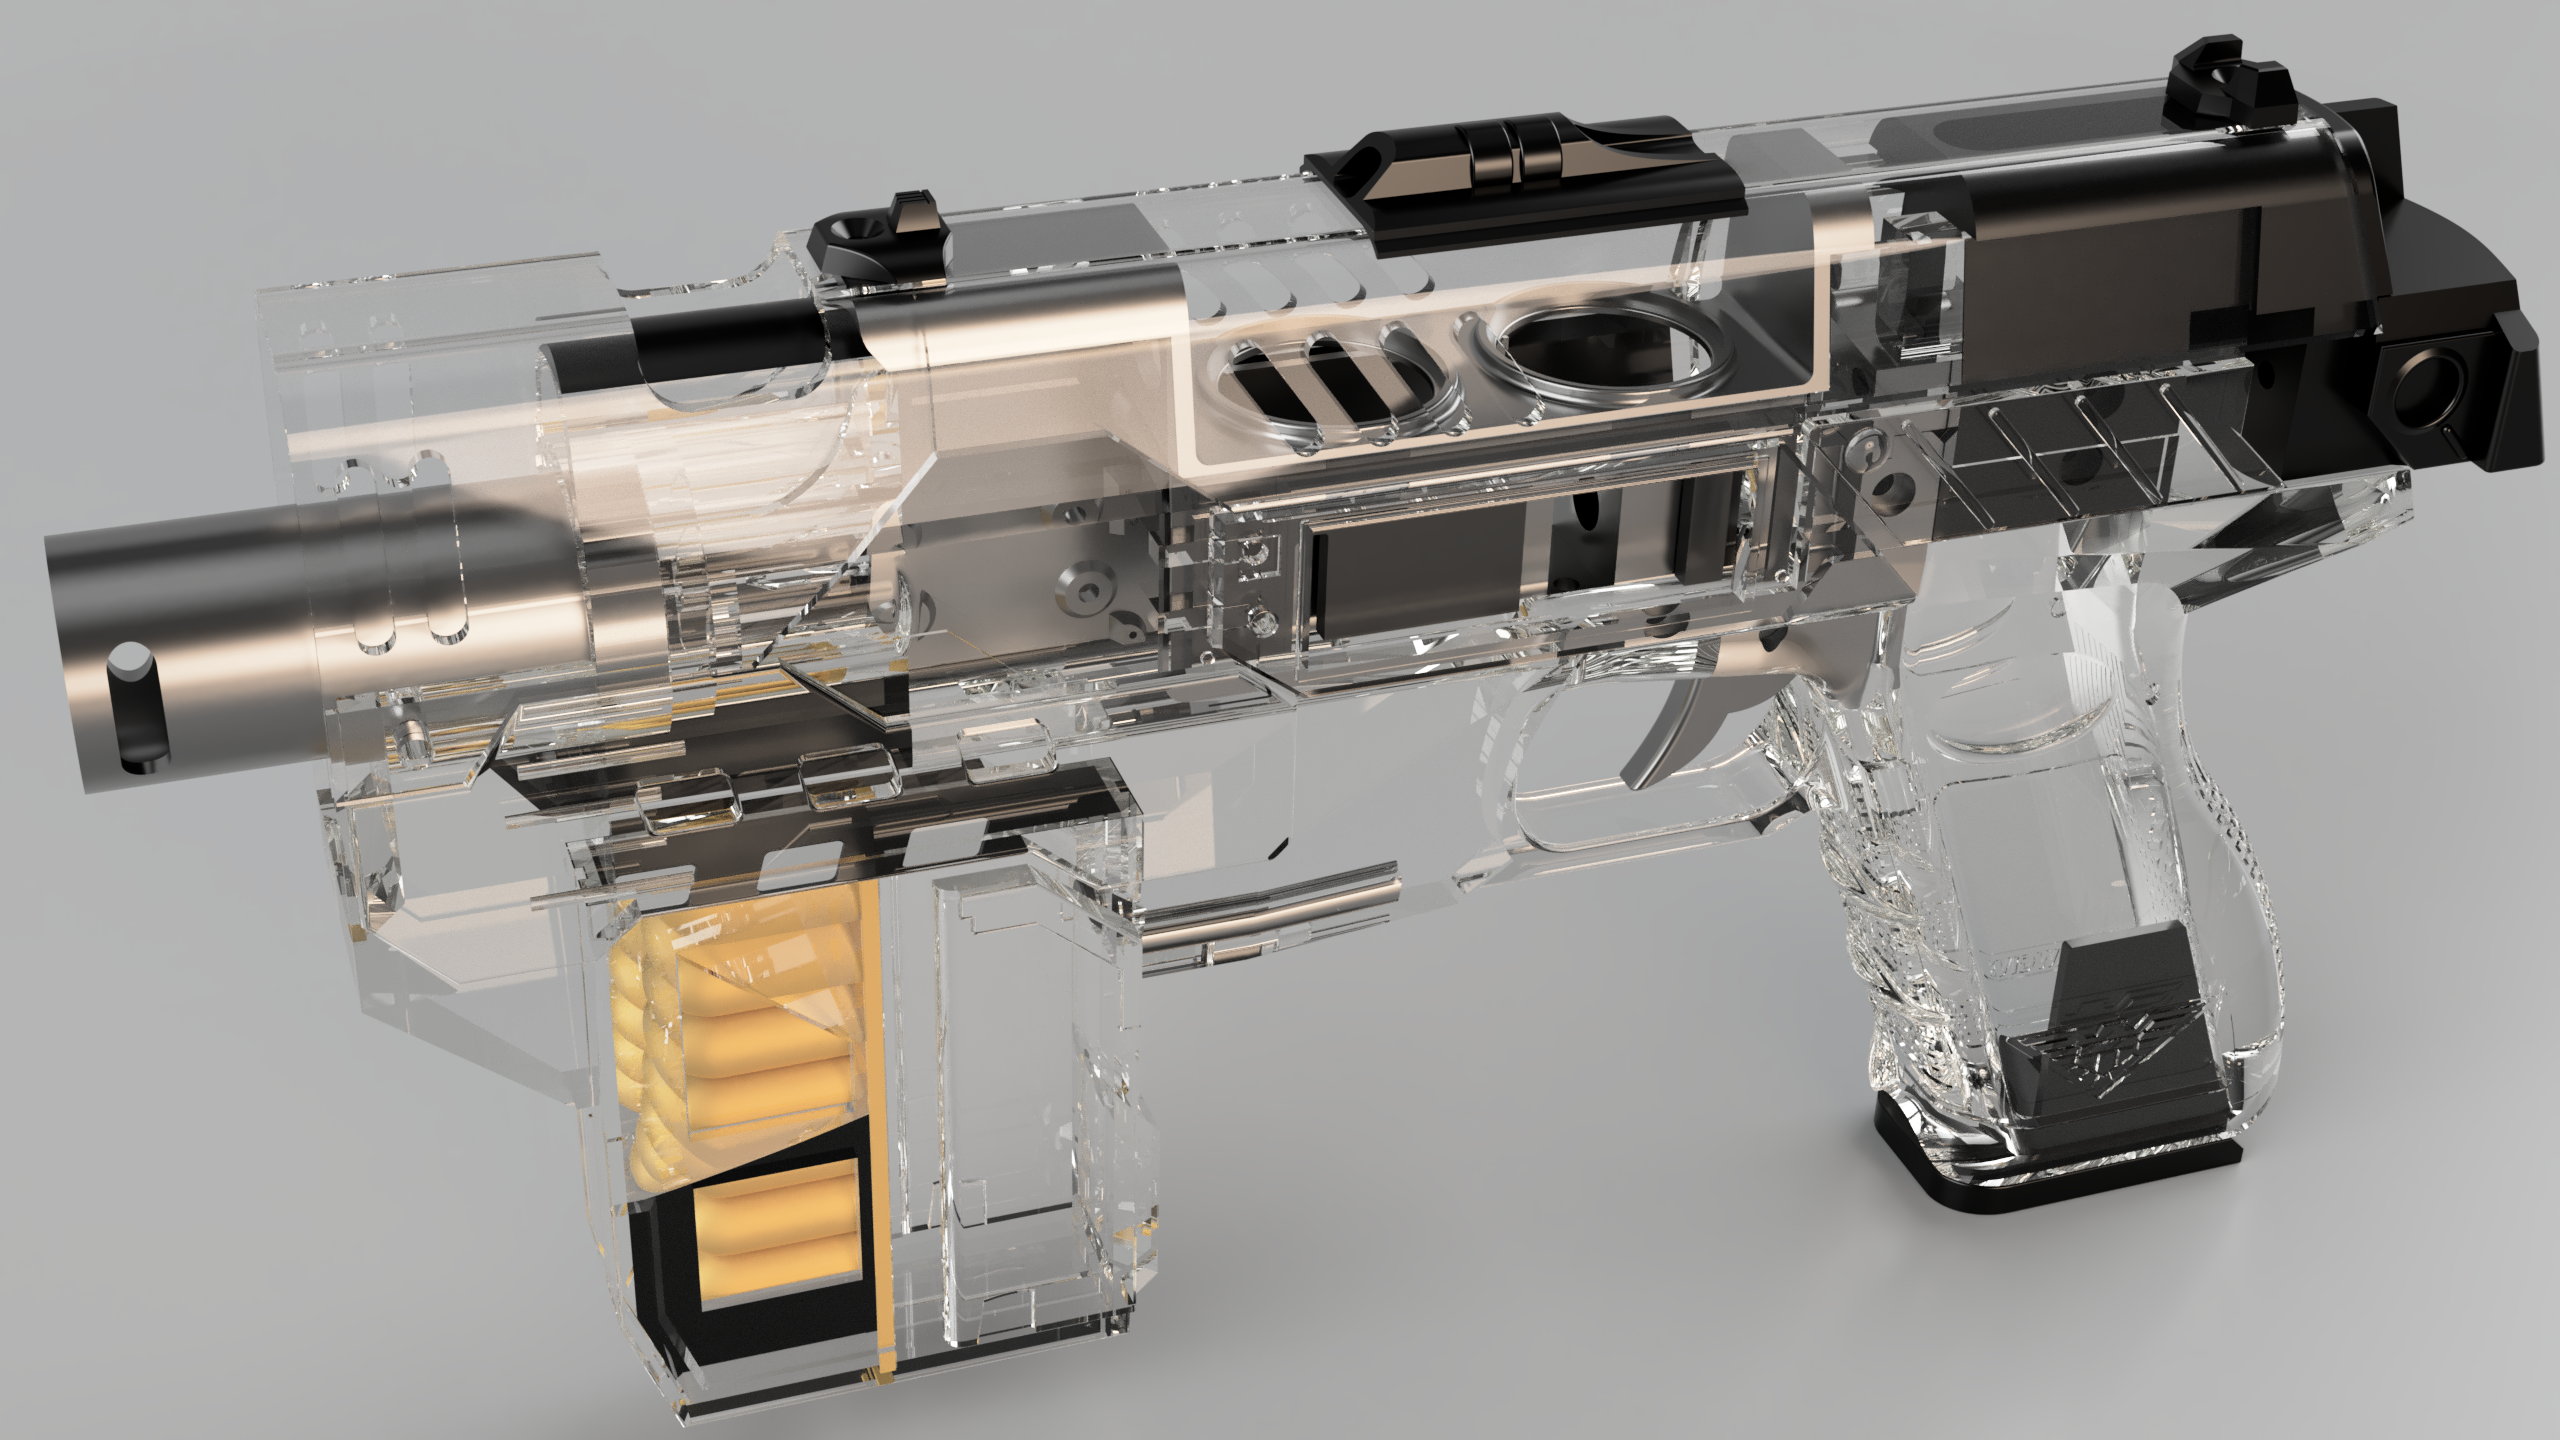 Lawgiver 2012 Clear View